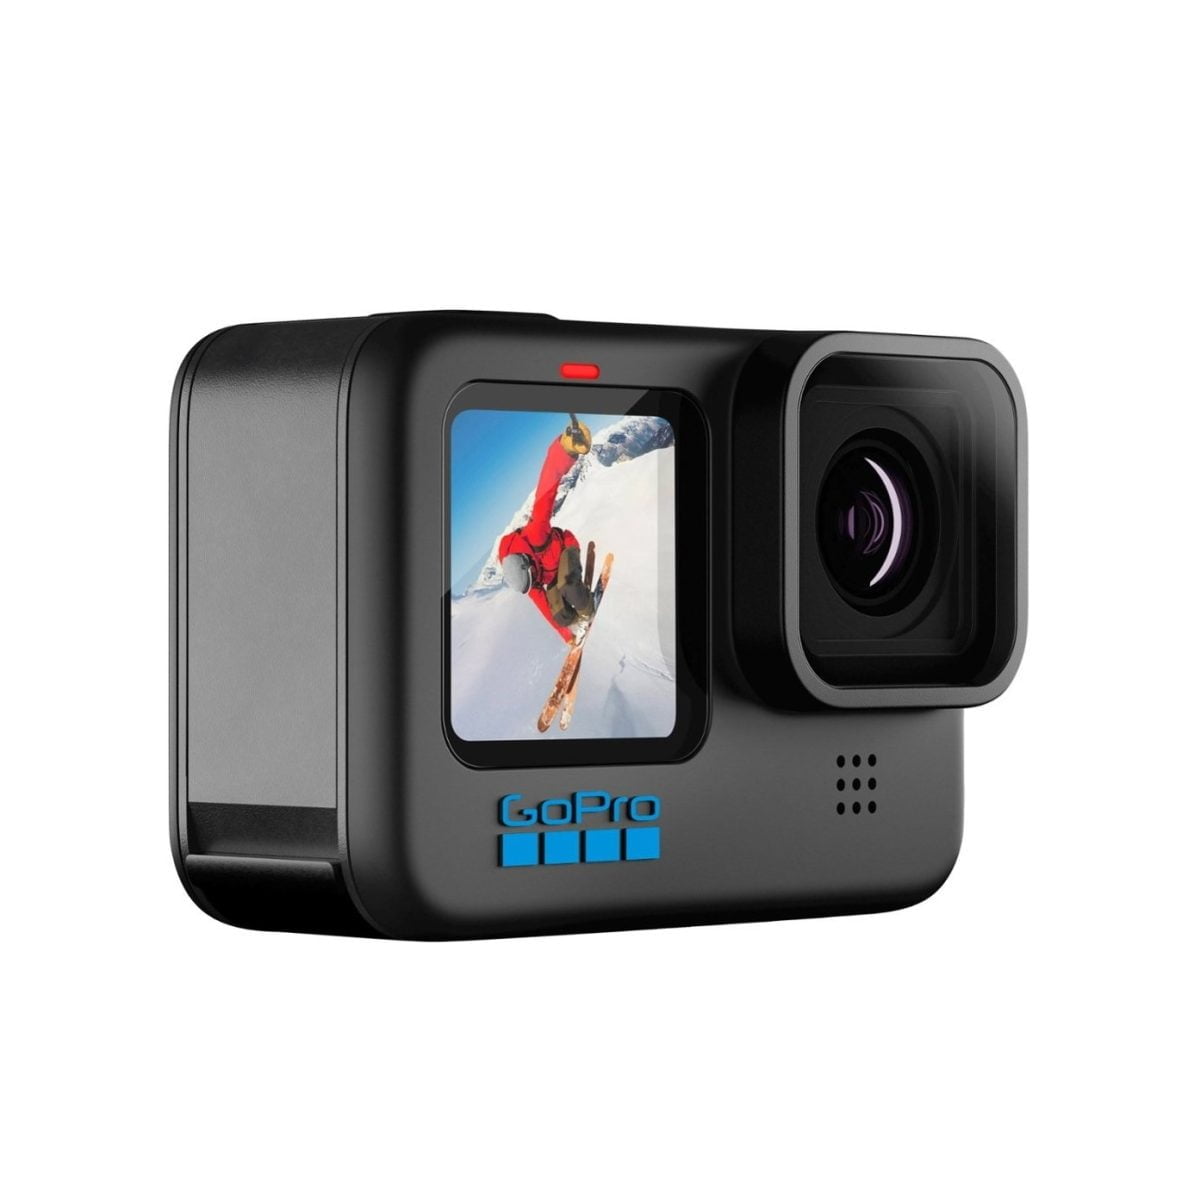 6474501 Rd Gopro &Amp;Lt;H1&Amp;Gt;Gopro Hero10 Action Camera Black (Stabilization Hyper Smooth 4.0)&Amp;Lt;/H1&Amp;Gt; Https://Www.youtube.com/Watch?V=Jgmiyzcpnse Capture Quality Vlogs With This Black Gopro Hero10 Camera. The Removable Rechargeable 1720 Mah Battery Offers Long Shooting Periods, While The Rugged, Waterproof Design Allows Flexible Use On Different Terrains. This Gopro Hero10 Camera Features A 1.4-Inch Screen For Framing Shots Seamlessly, And The 23Mp Sensor Captures 5.3K Videos Effortlessly. Gopro Hero10 Gopro Hero10 Action Camera Black